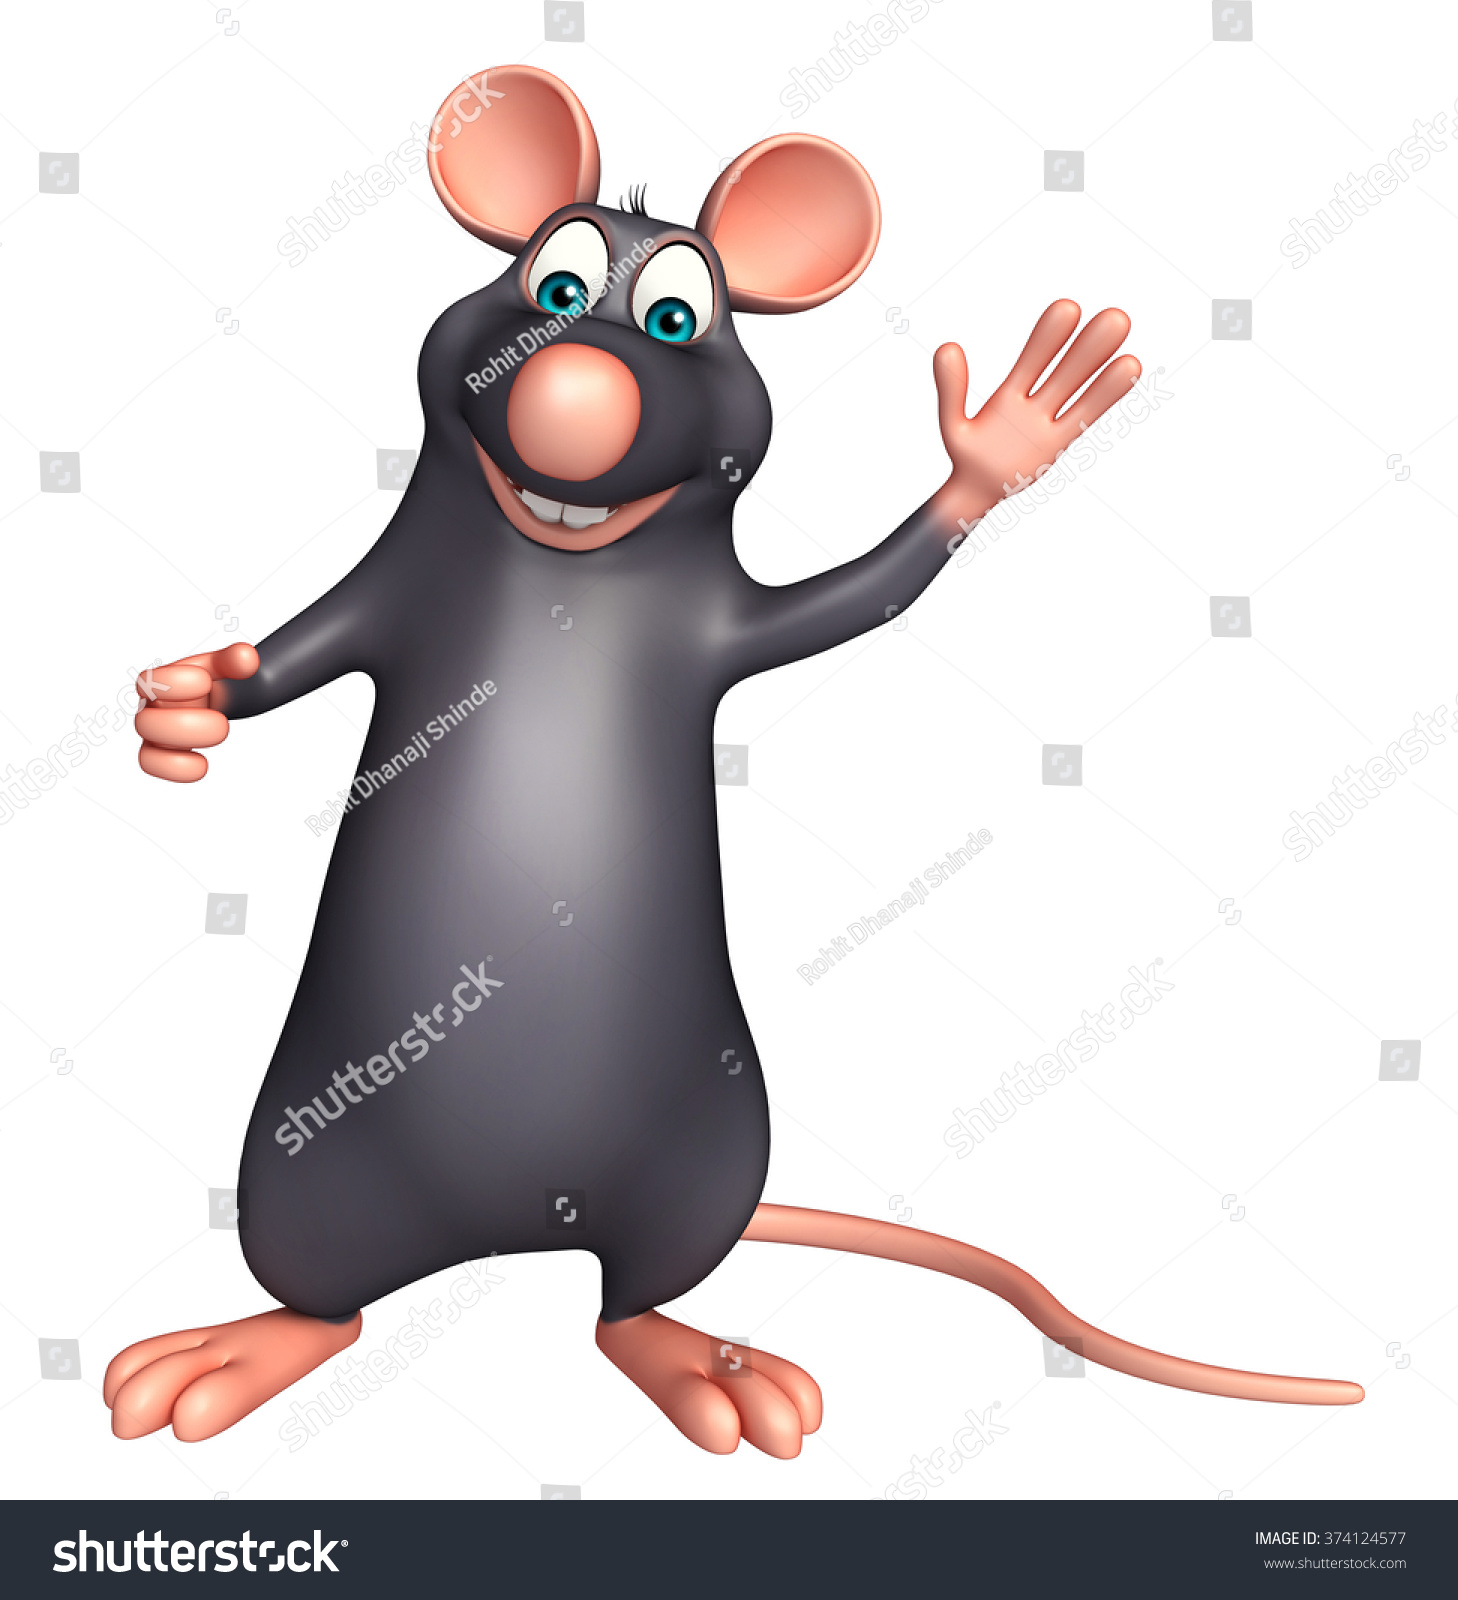 Featured image of post Funny Rat Pictures Cartoon - We hope you enjoy our growing collection of hd images to use as a background or home screen for your smartphone or computer.